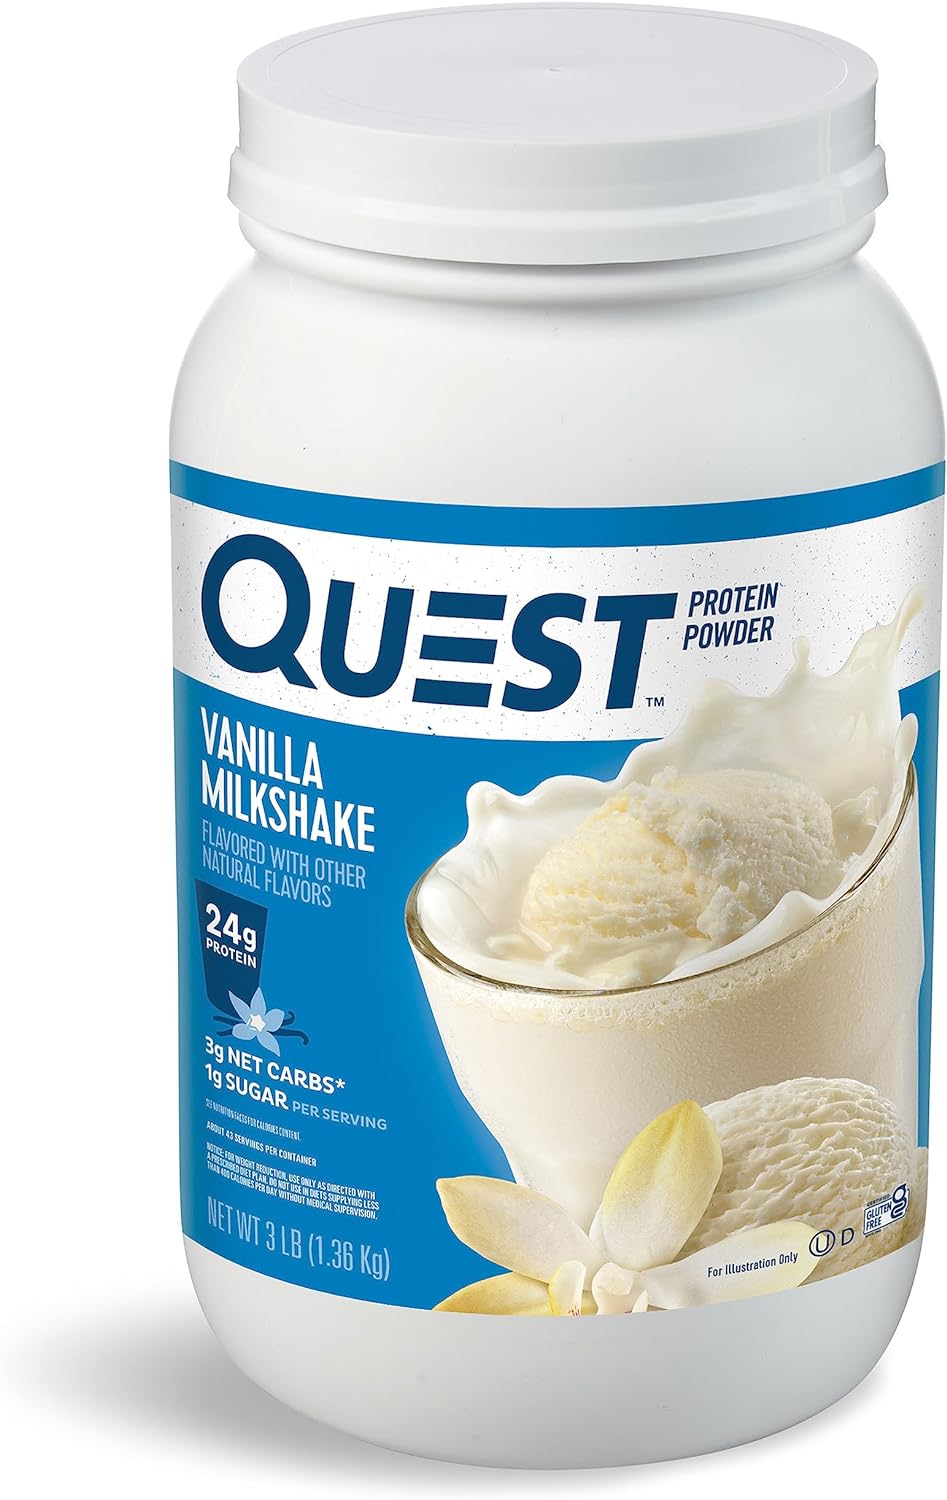 3-lbs Quest Nutrition Protein Powder (3 flavors) + $10 Amazon Credit $37.85 w/ S&S + Free Shipping